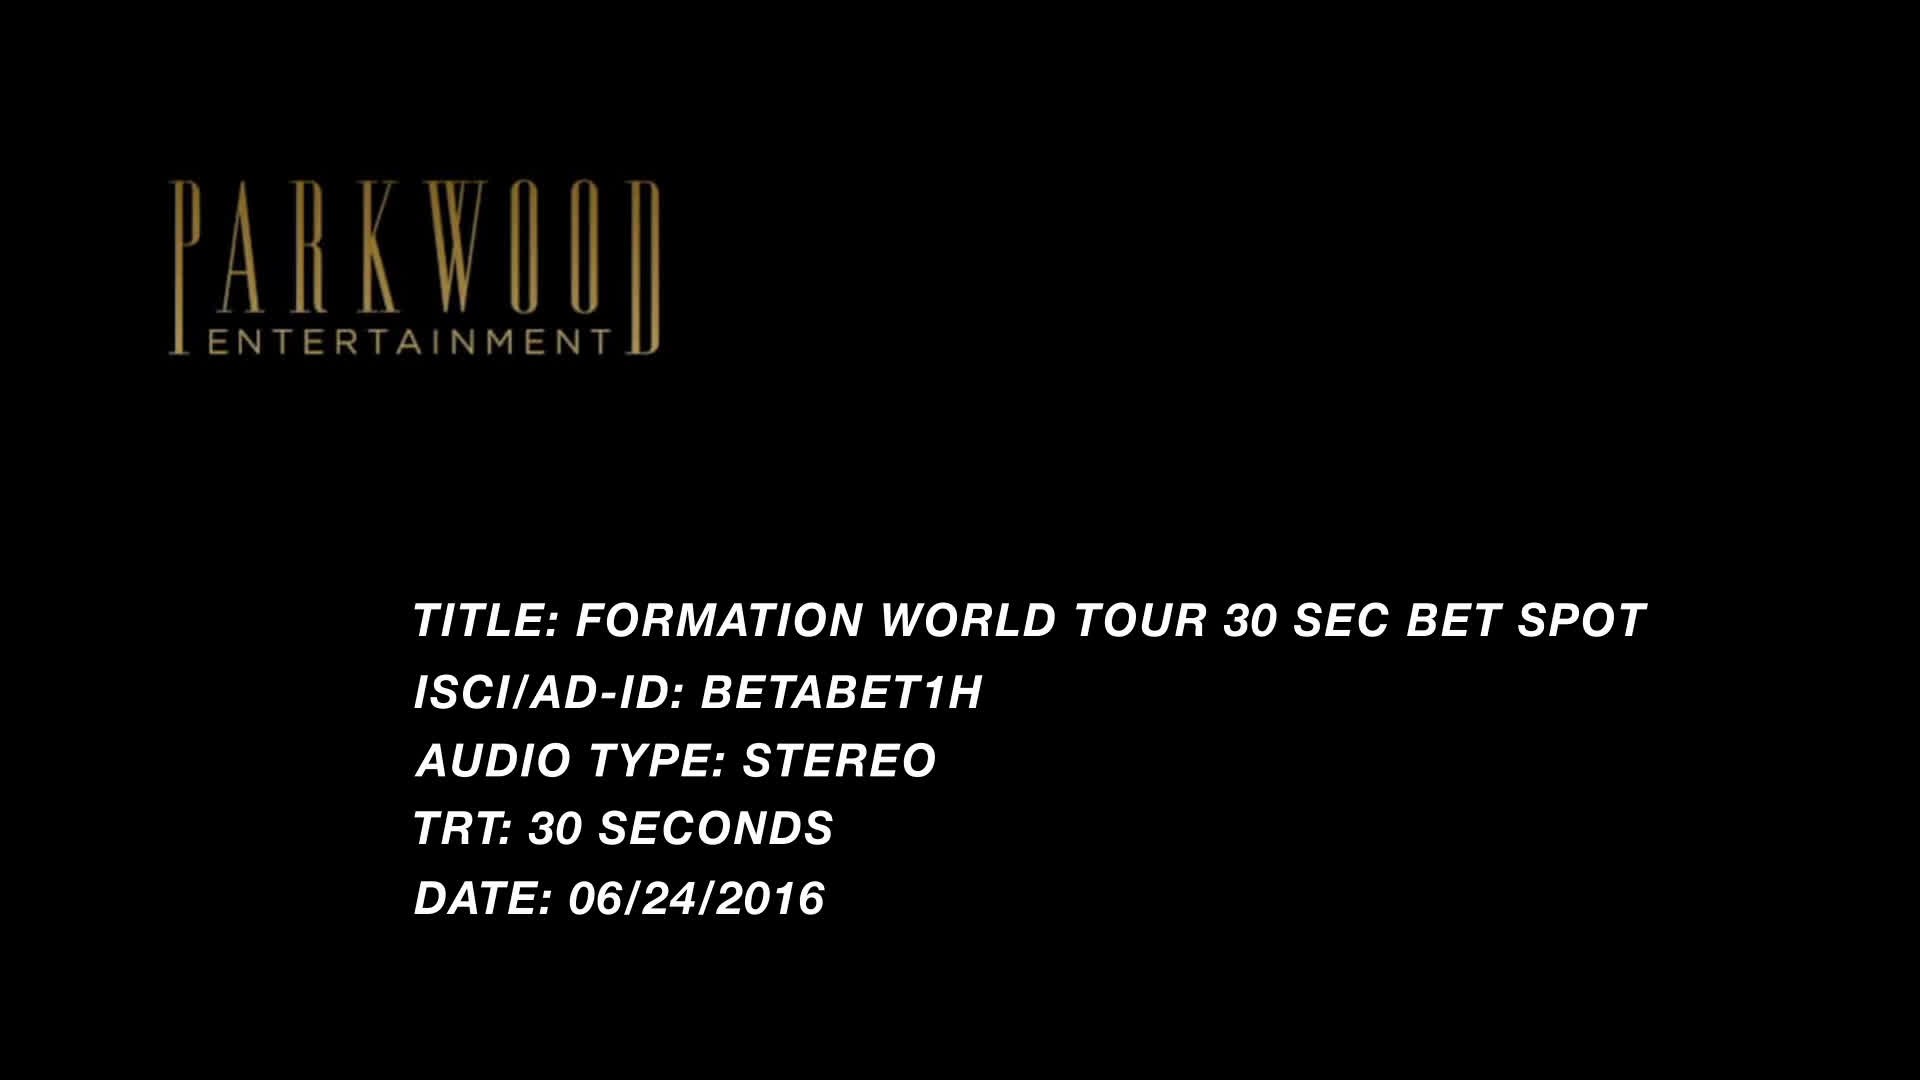 FORMATION WORLD TOUR